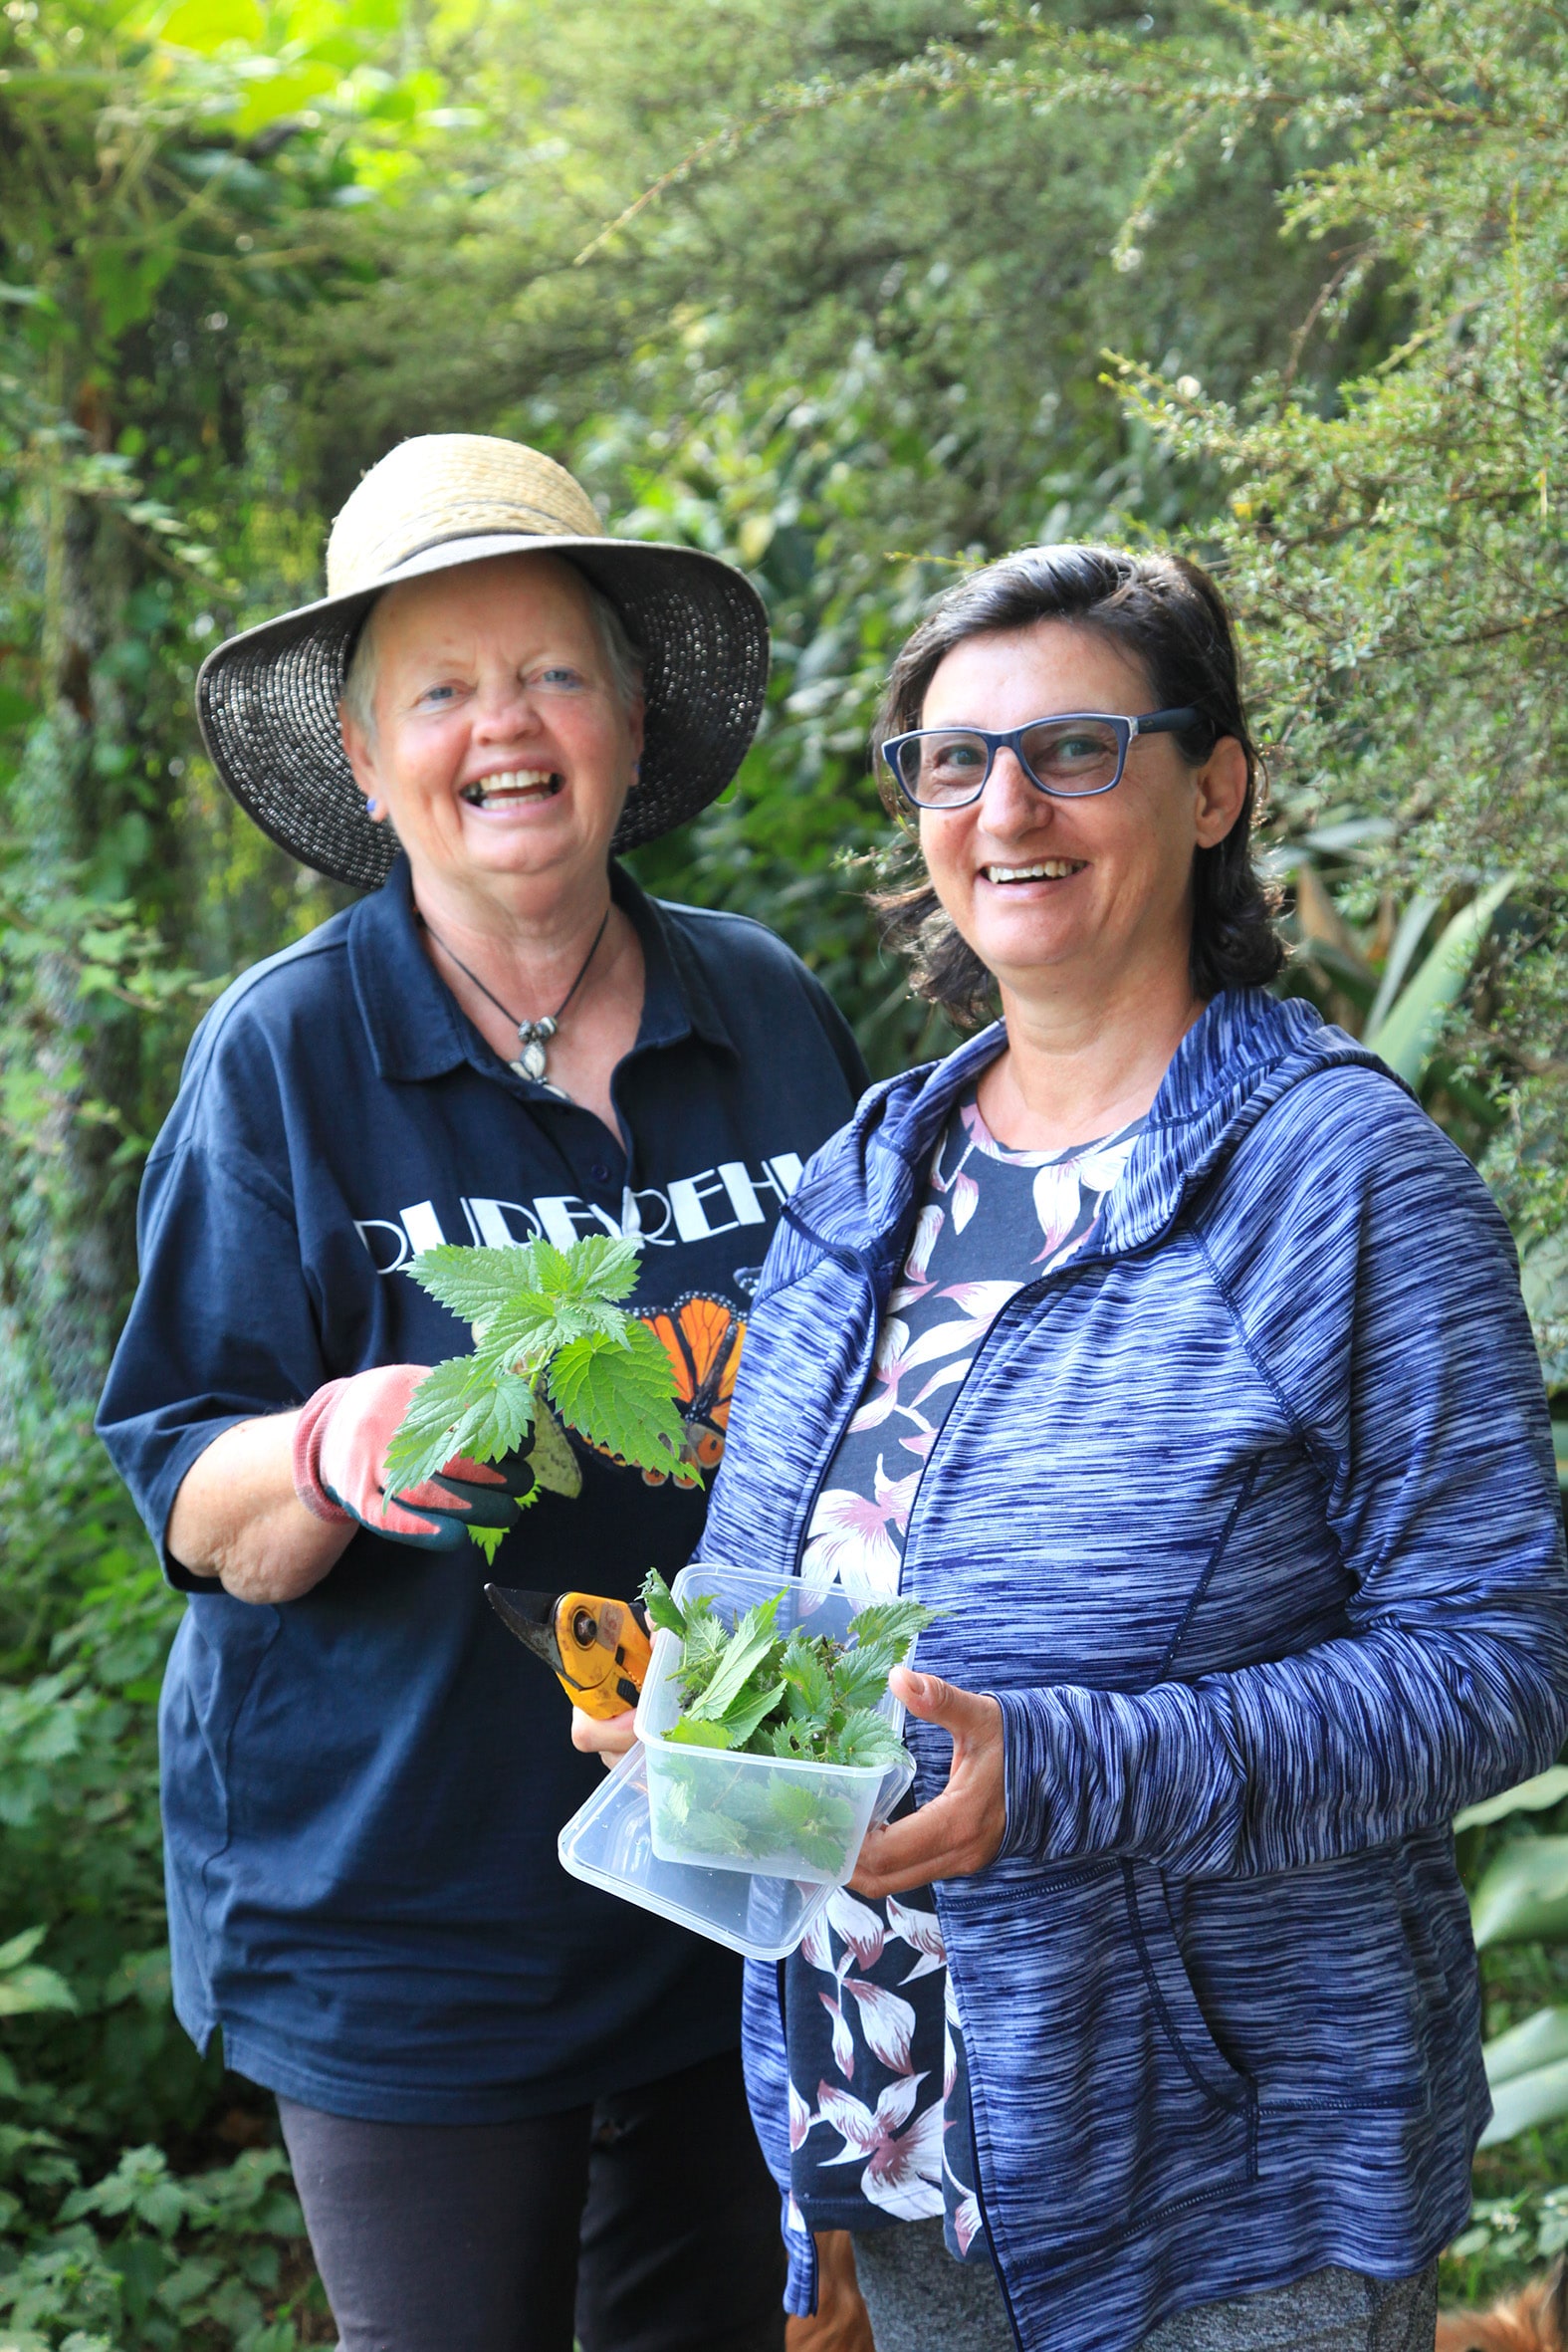 Jacqui Knight and Melody Shinnick standing in garden holding containers of plants